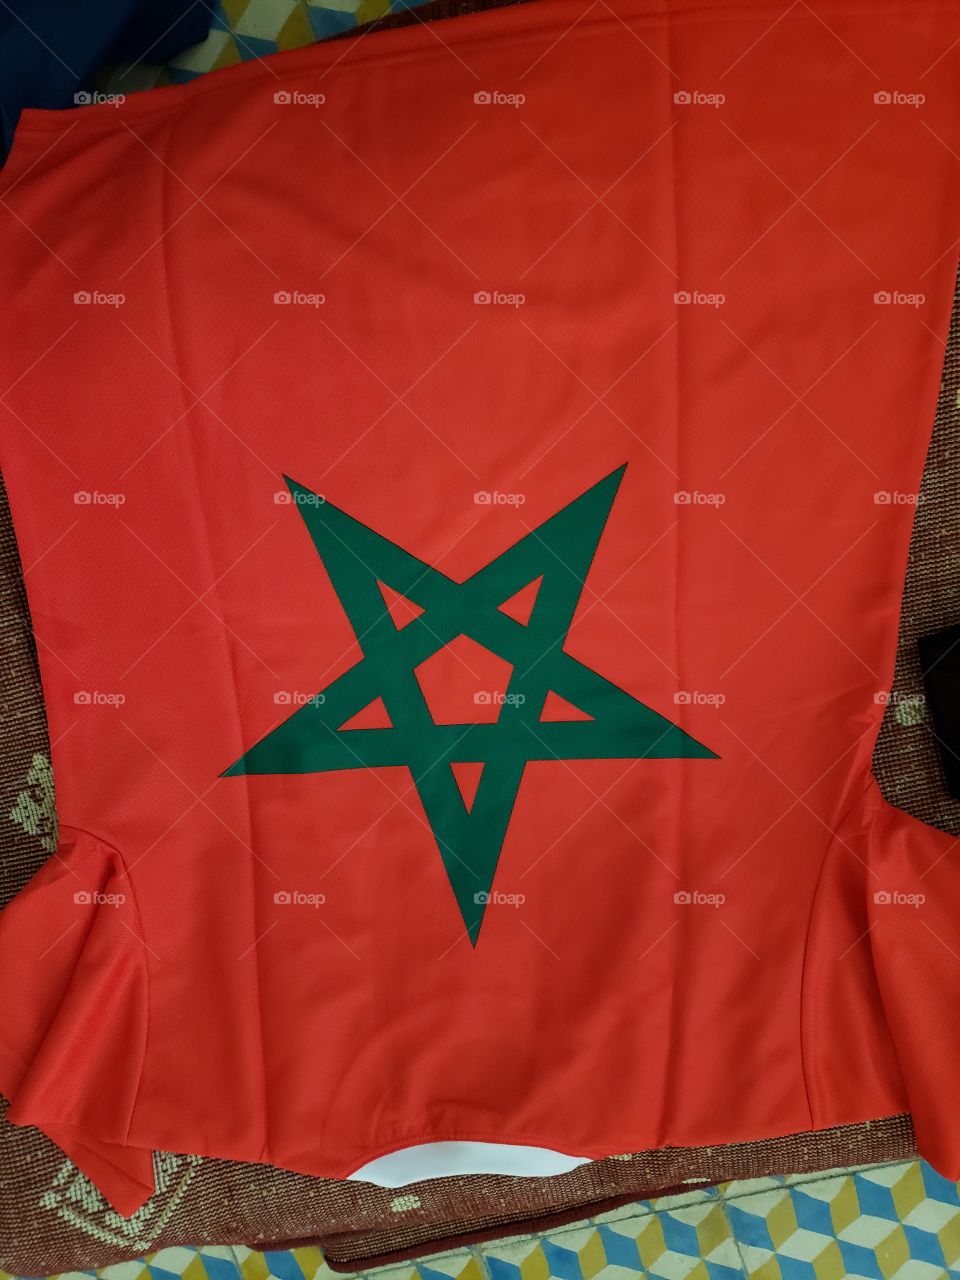 Moroccan Flag T-Shirt ❤ Supporting Morocco ❤